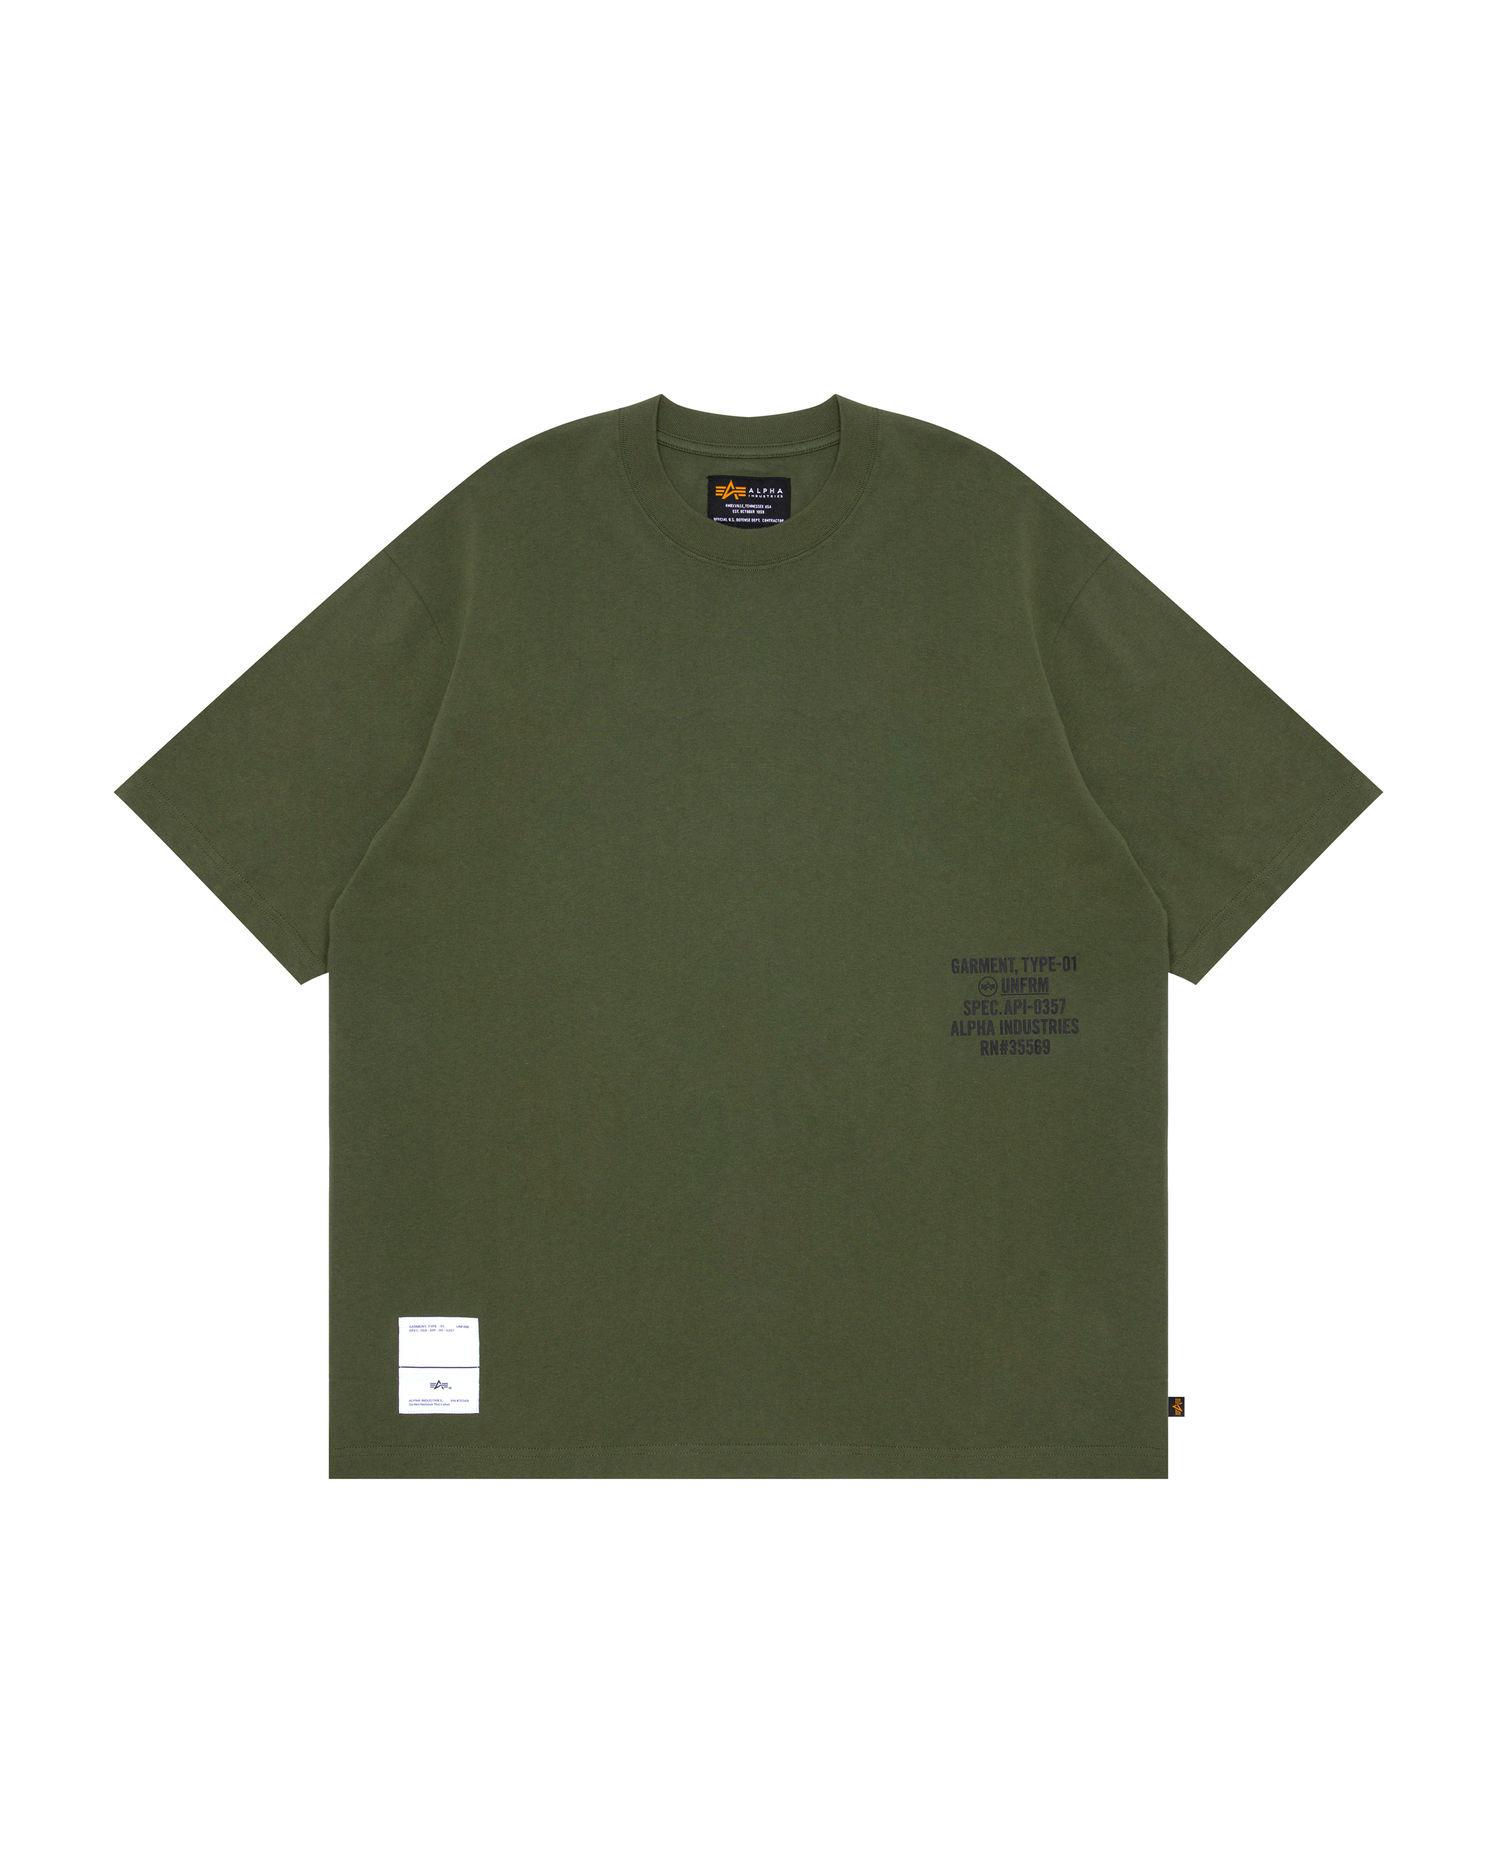 Relaxed logo tee by ALPHA INDUSTRIES